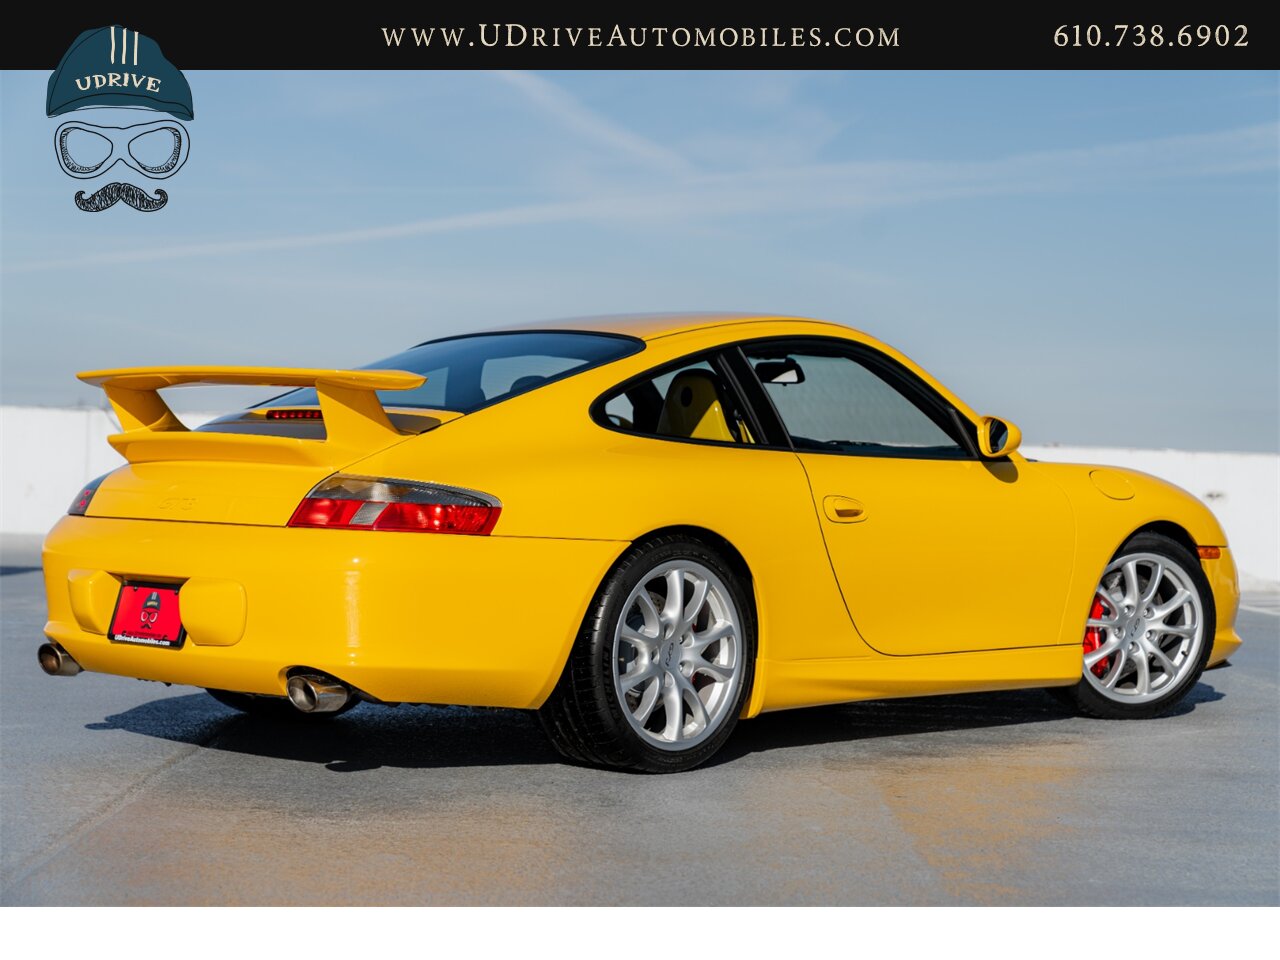 2005 Porsche 911 GT3 996 Speed Yellow Sport Seats Pntd Hardbacks  Pntd Console Deviating Stitch Yellow Accents Throughout - Photo 3 - West Chester, PA 19382